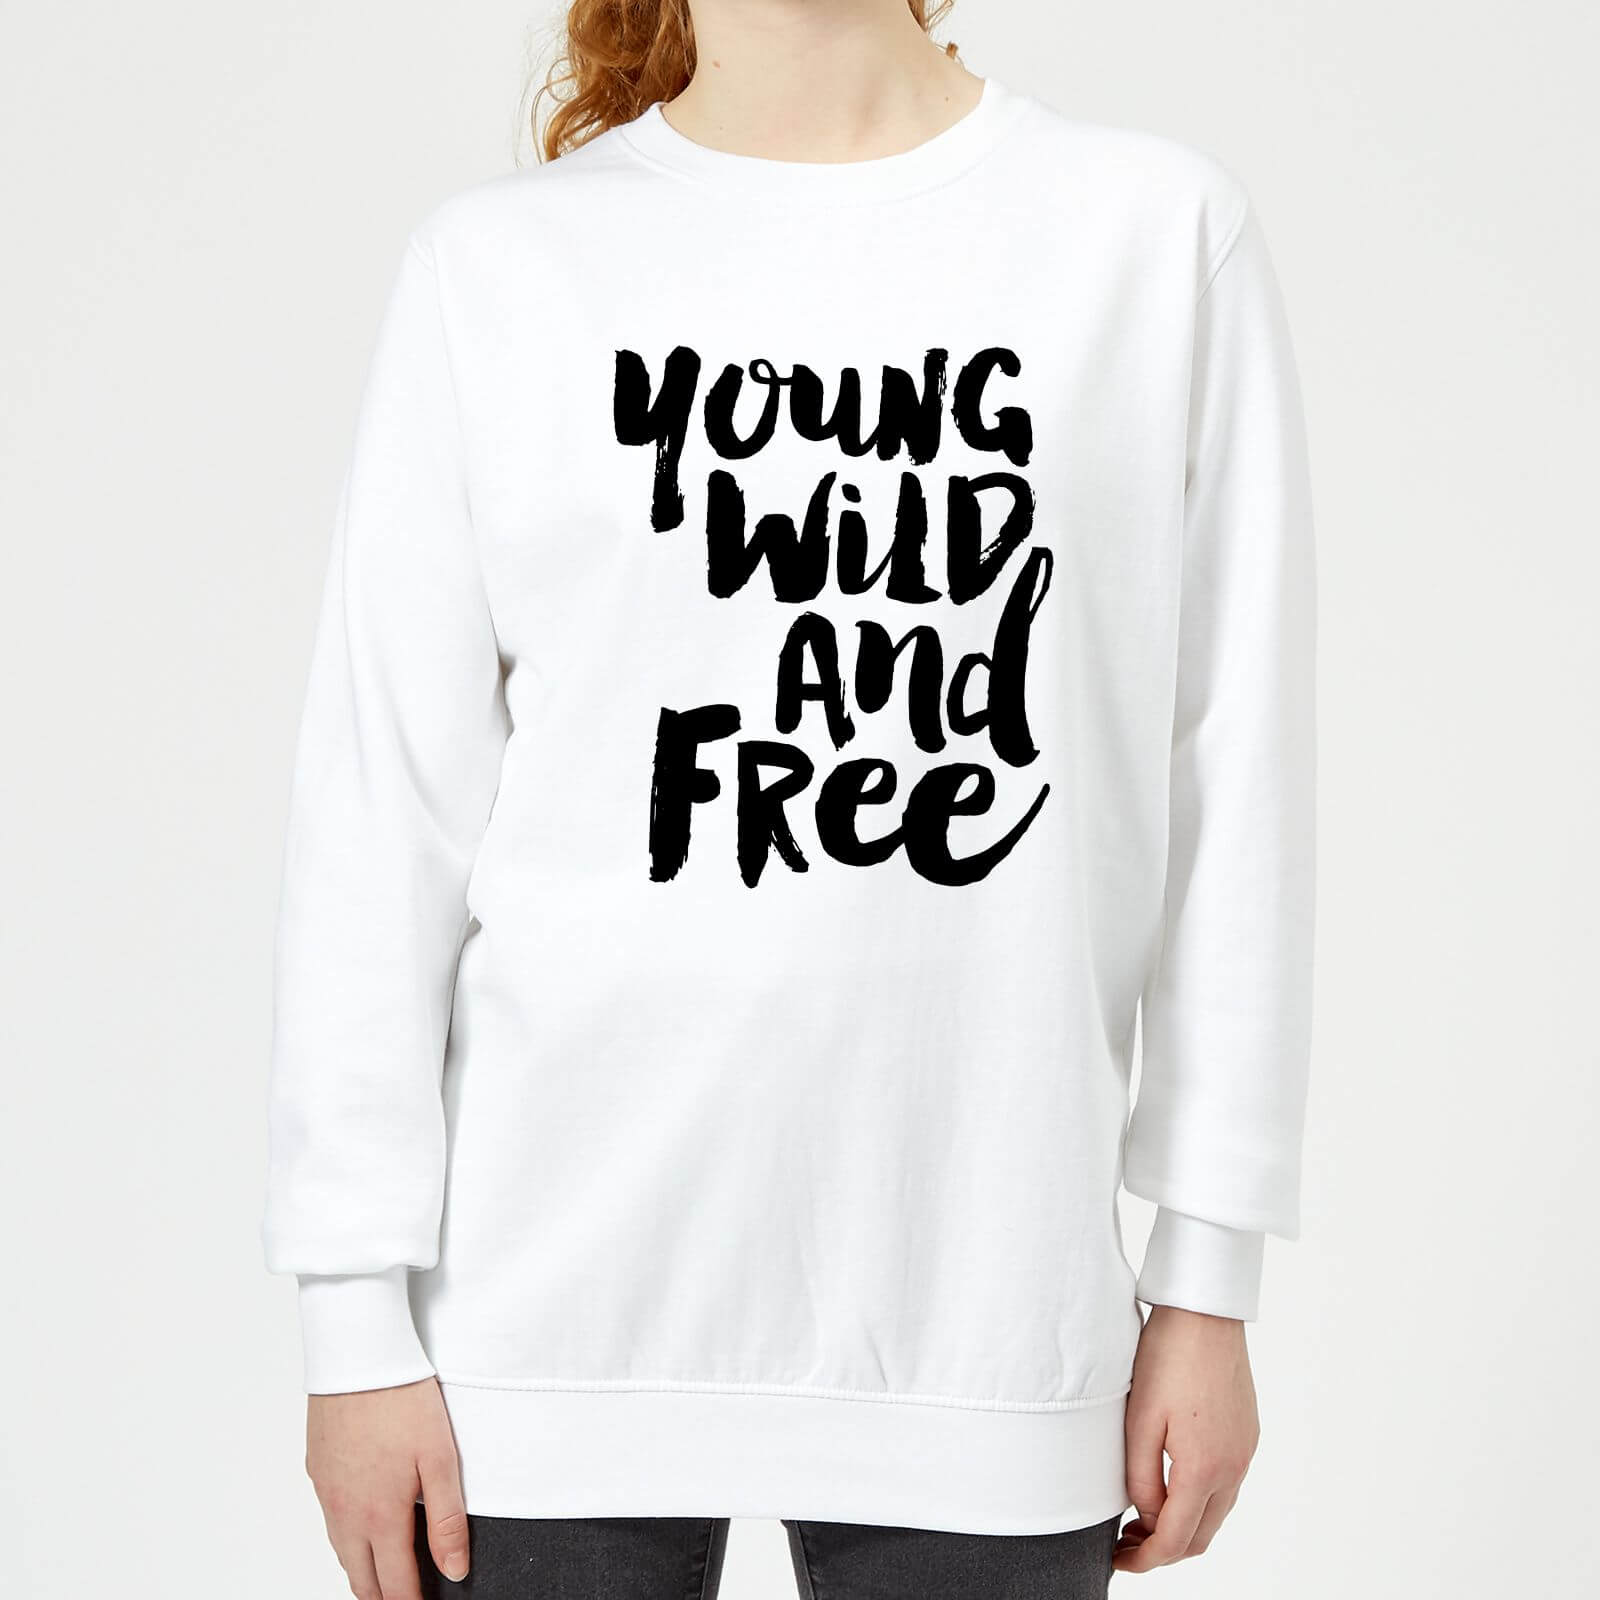 The Motivated Type Young, Wild And Free. Women's Sweatshirt - White - XS